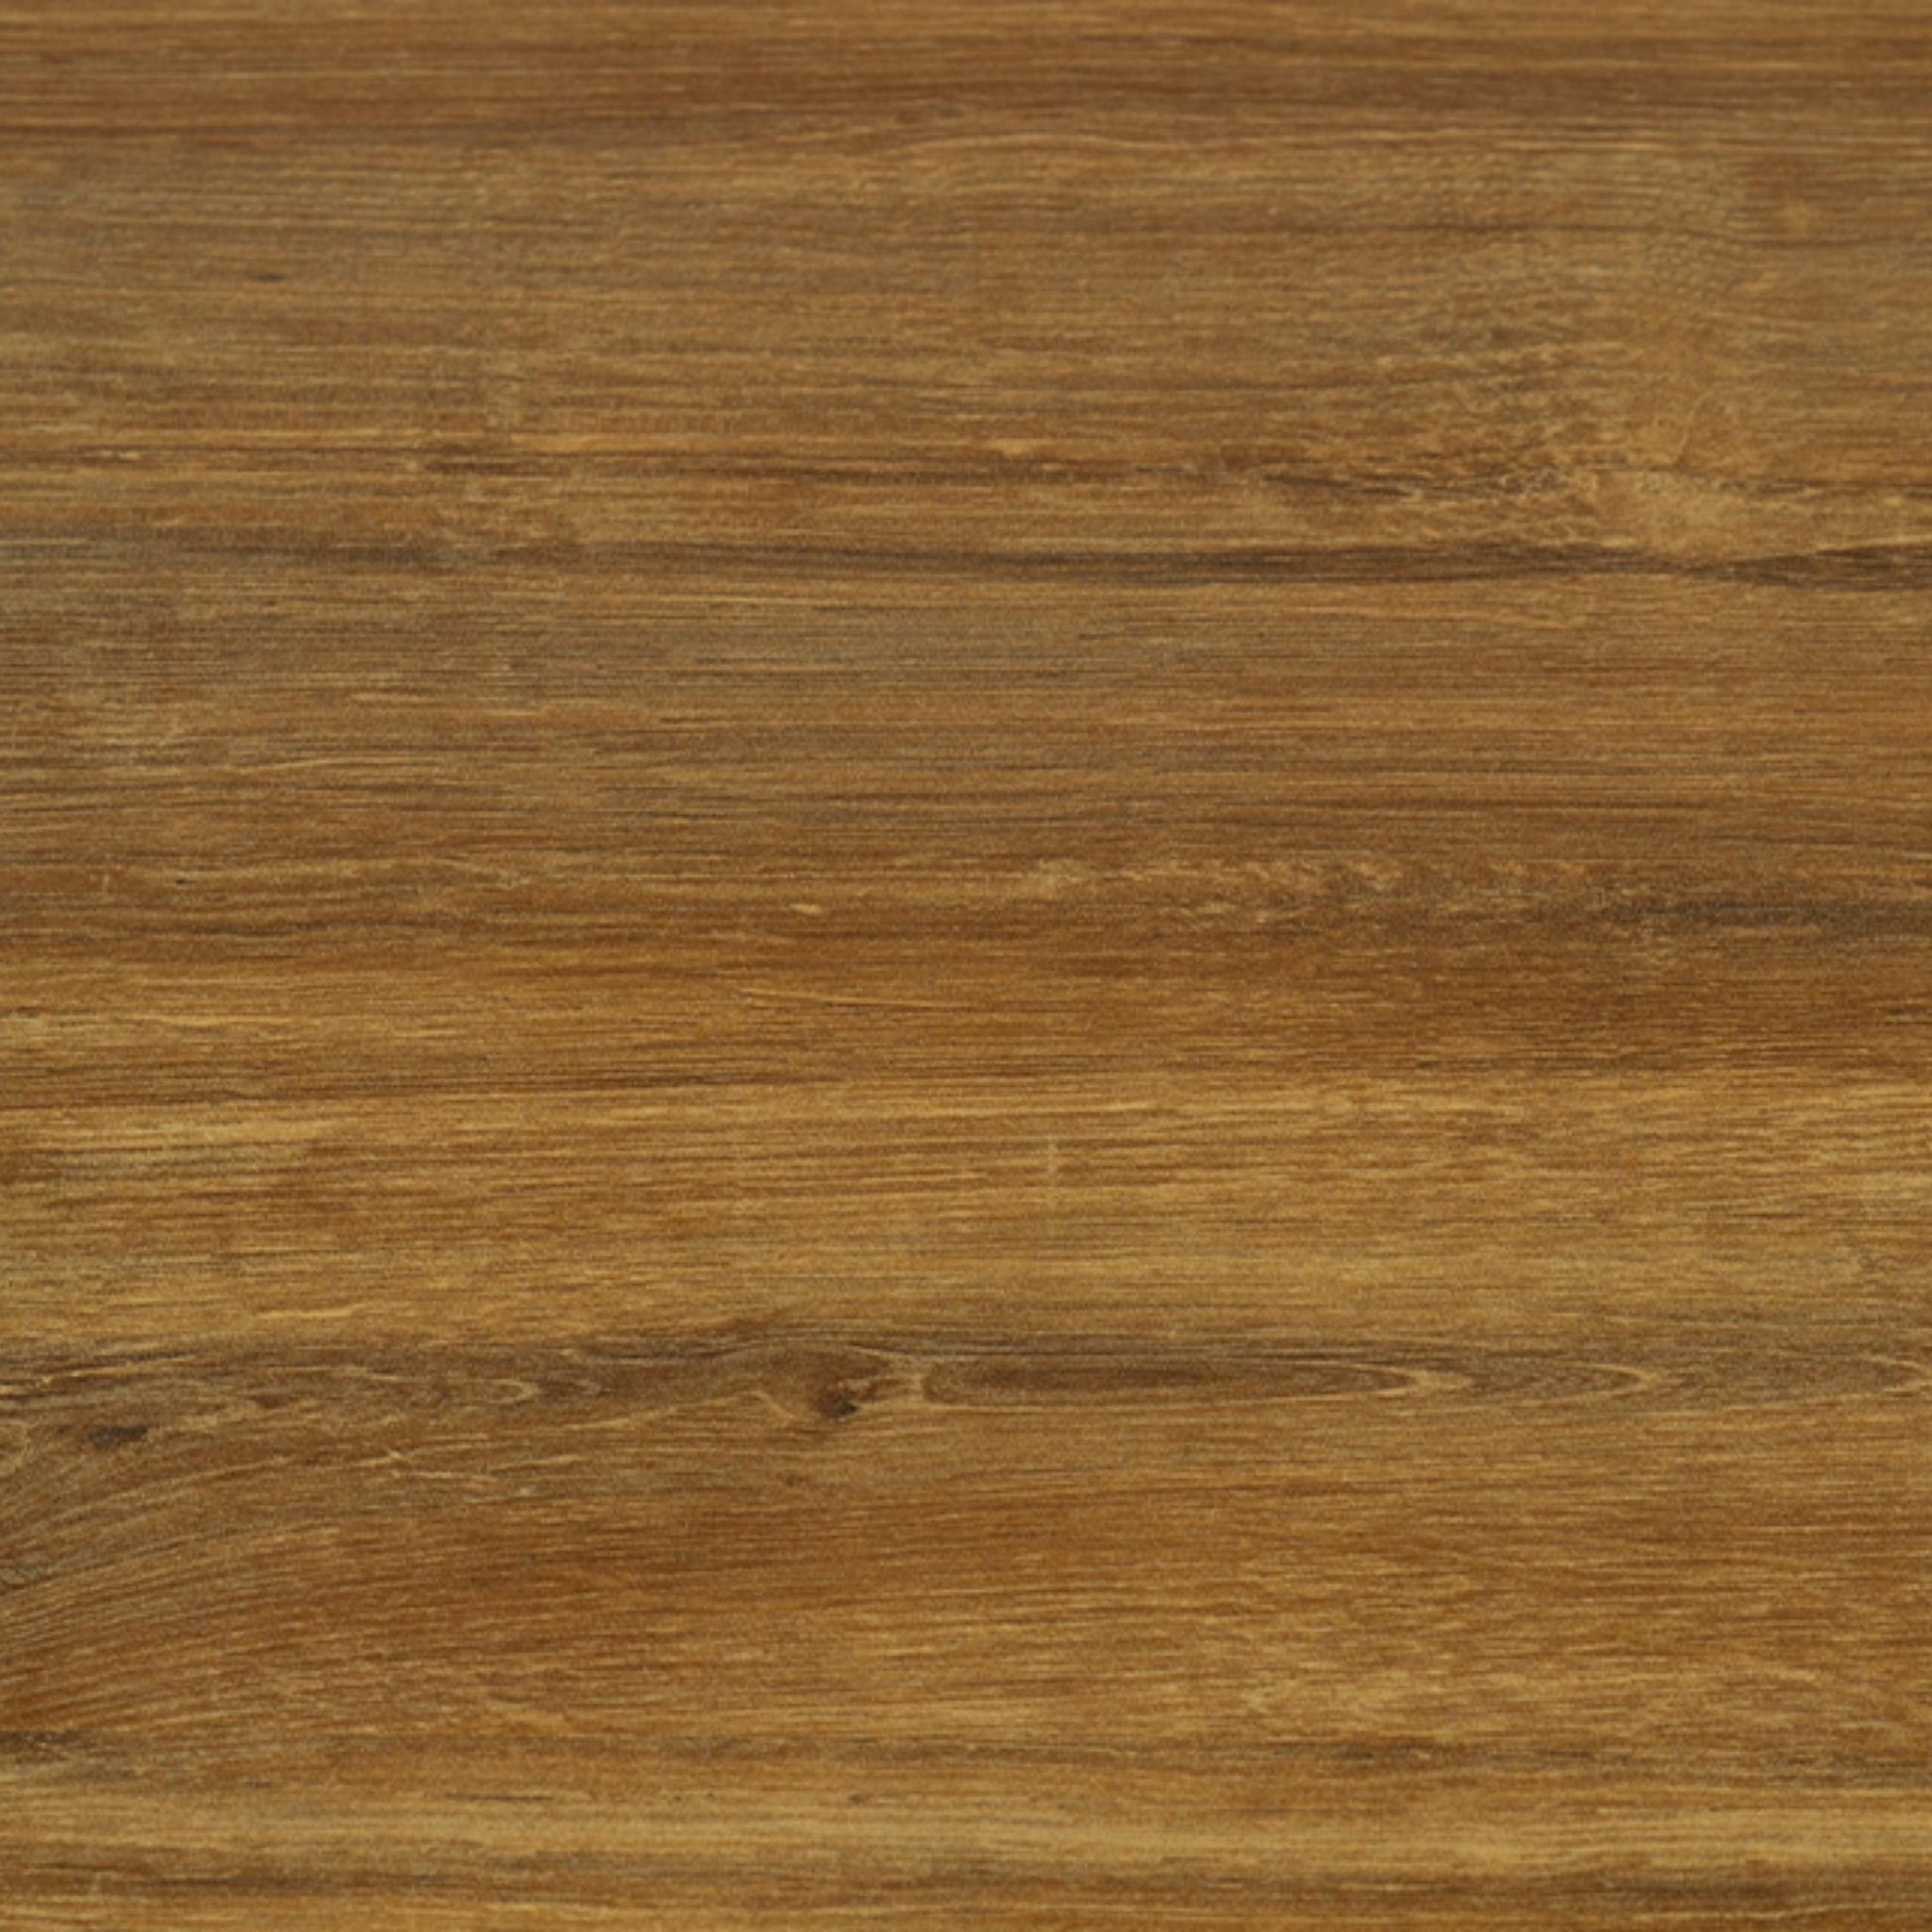 Rustic Hickory Tabletop swatch